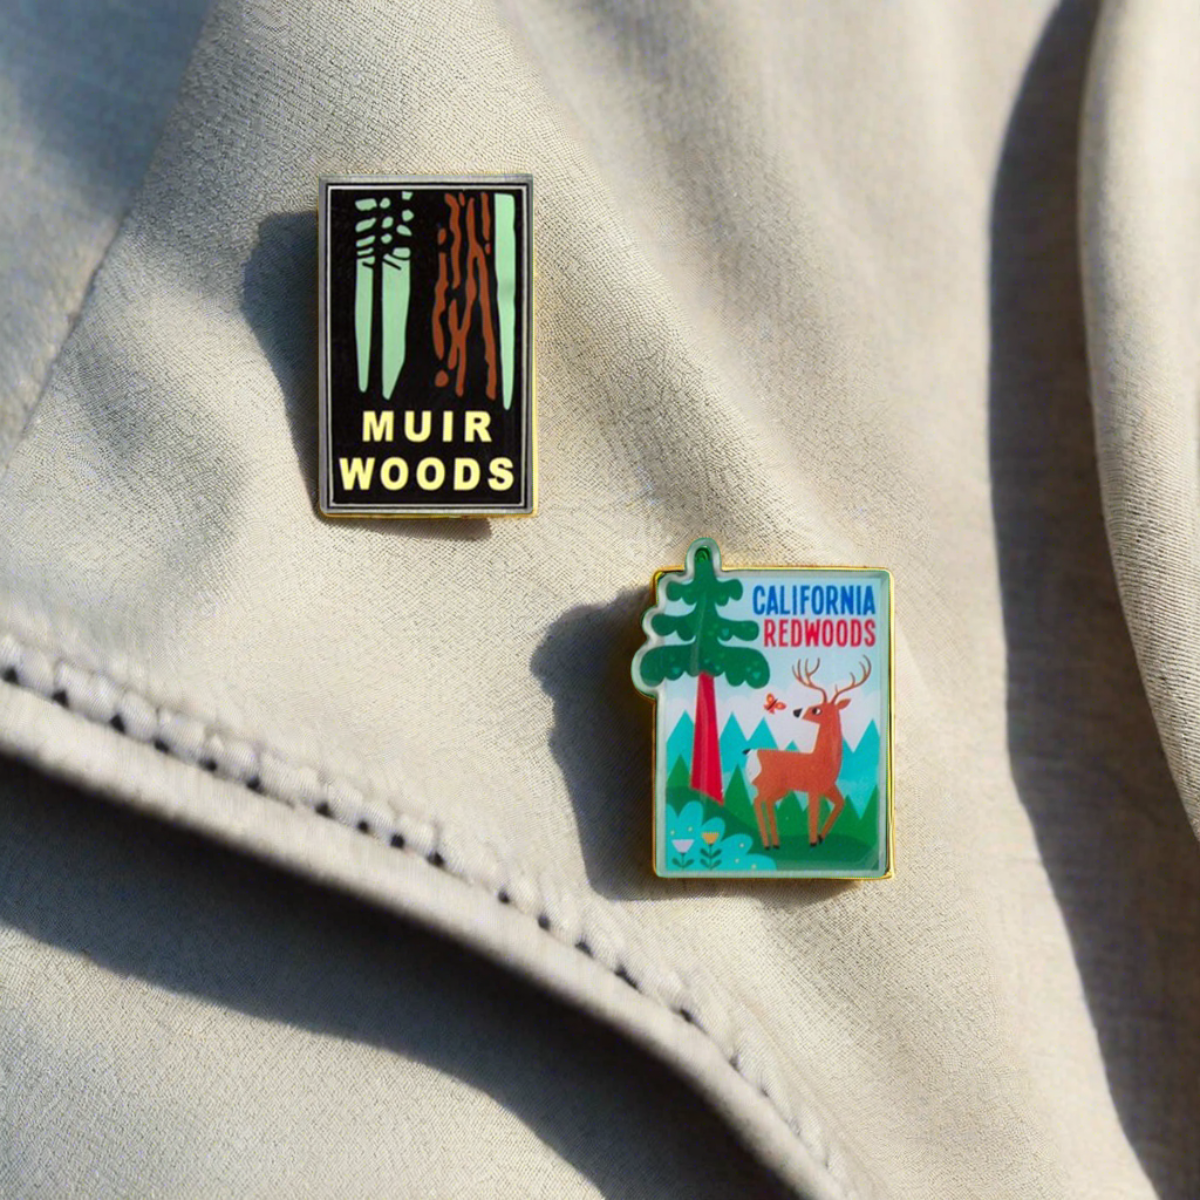 Muir Woods and California Redwoods decorative pins on lapel of denim jacket